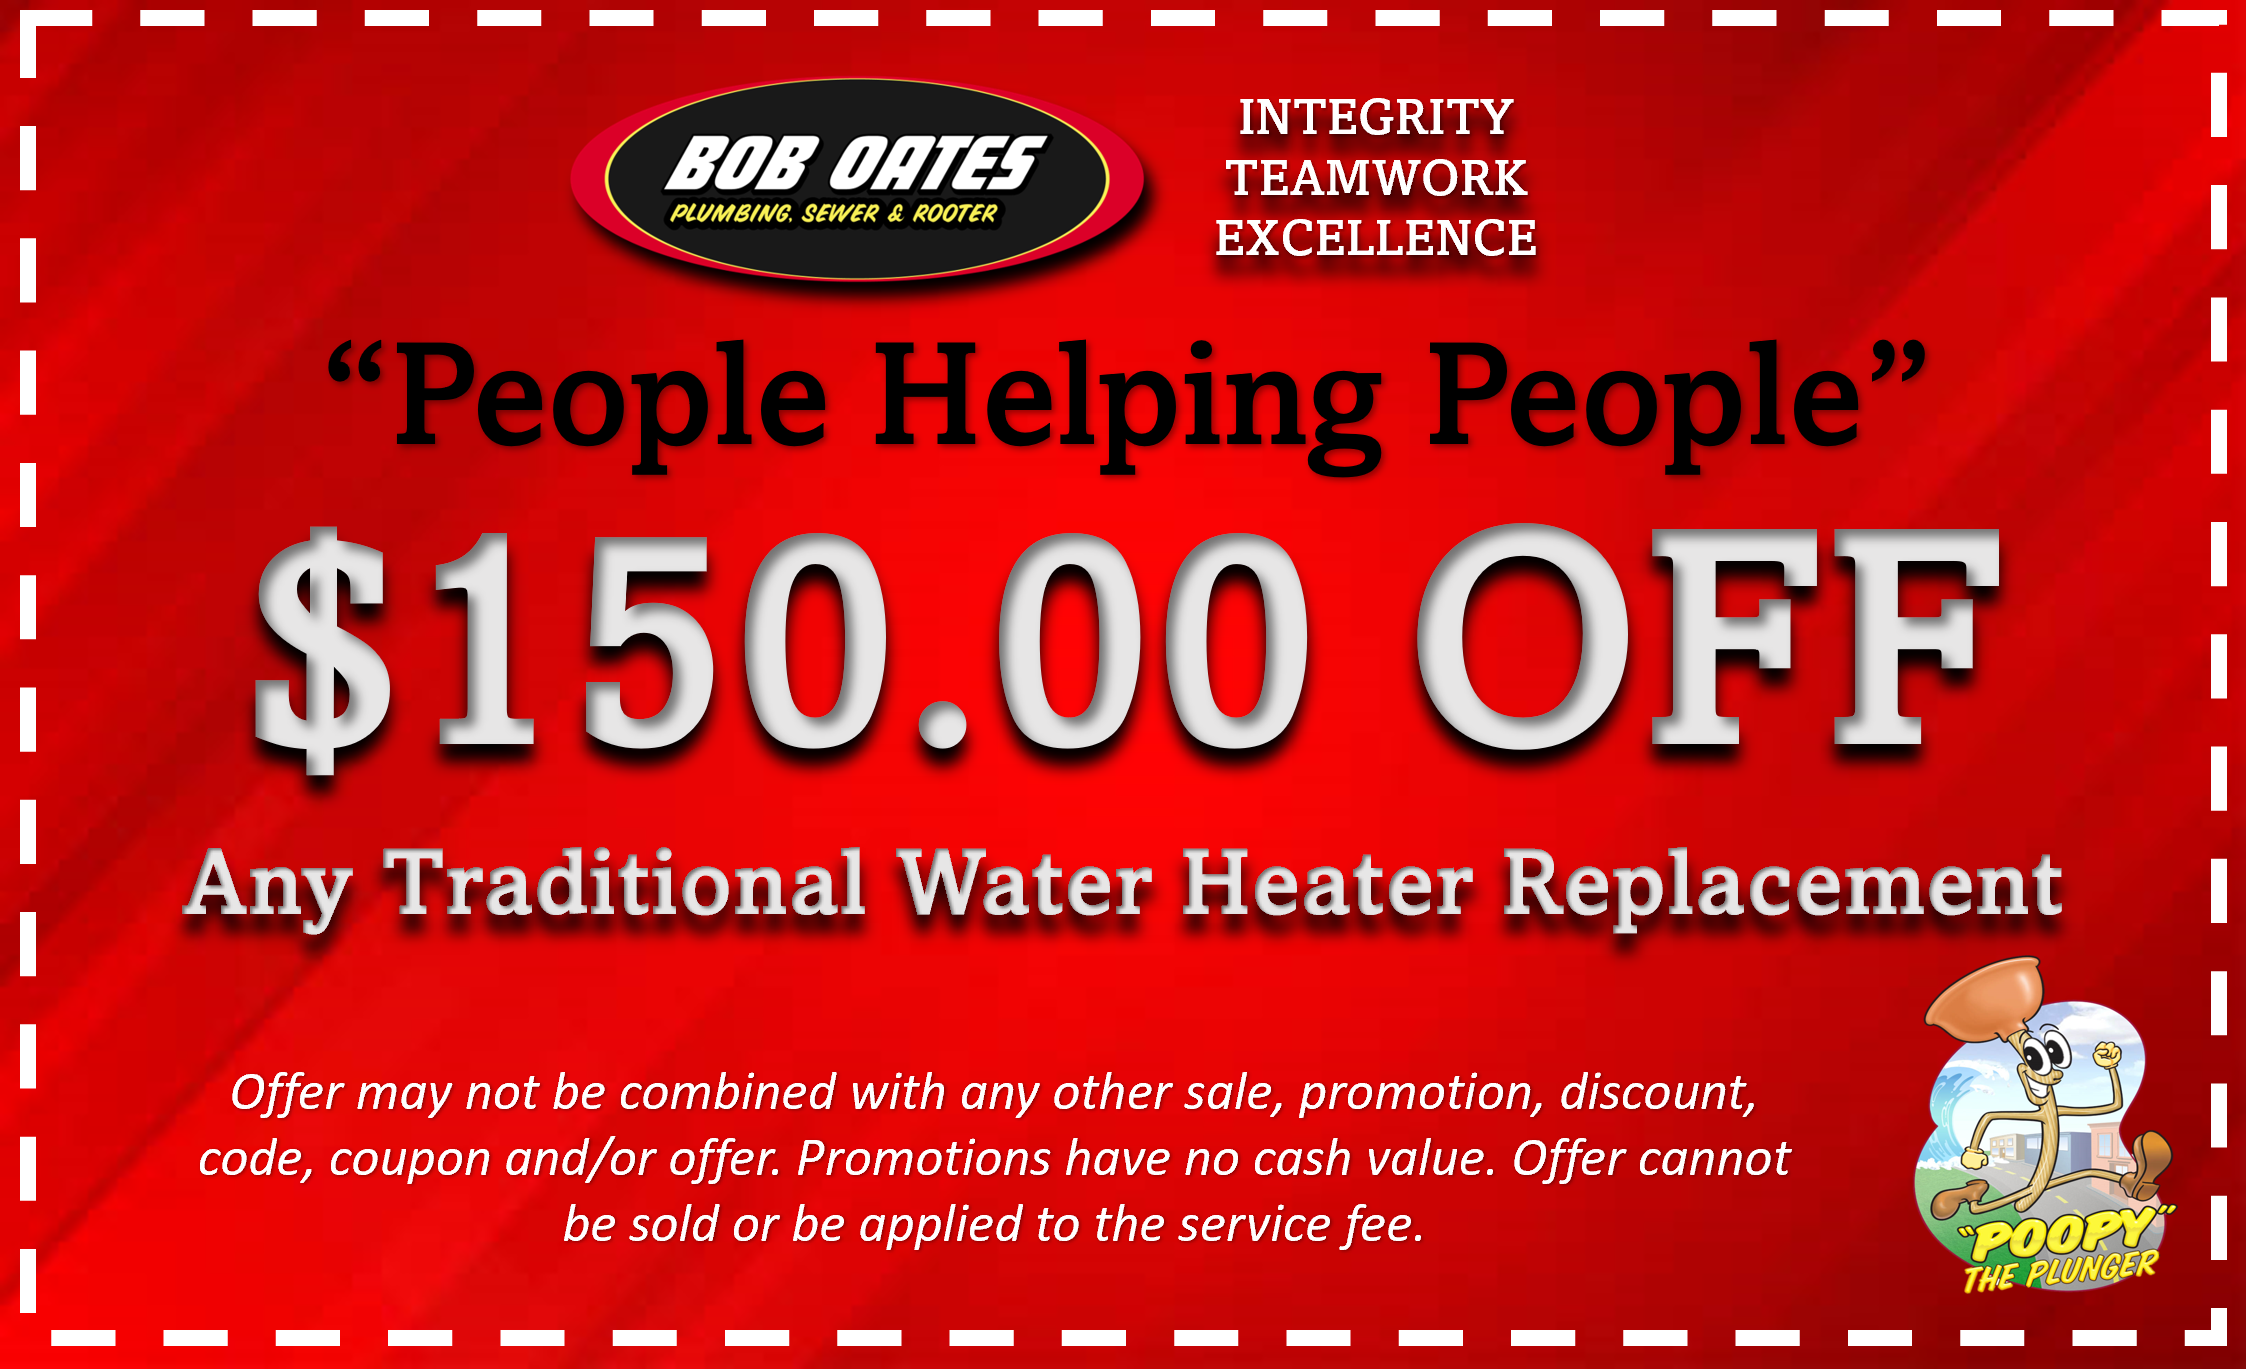 Coupon for $150 off any traditional water heater replacement